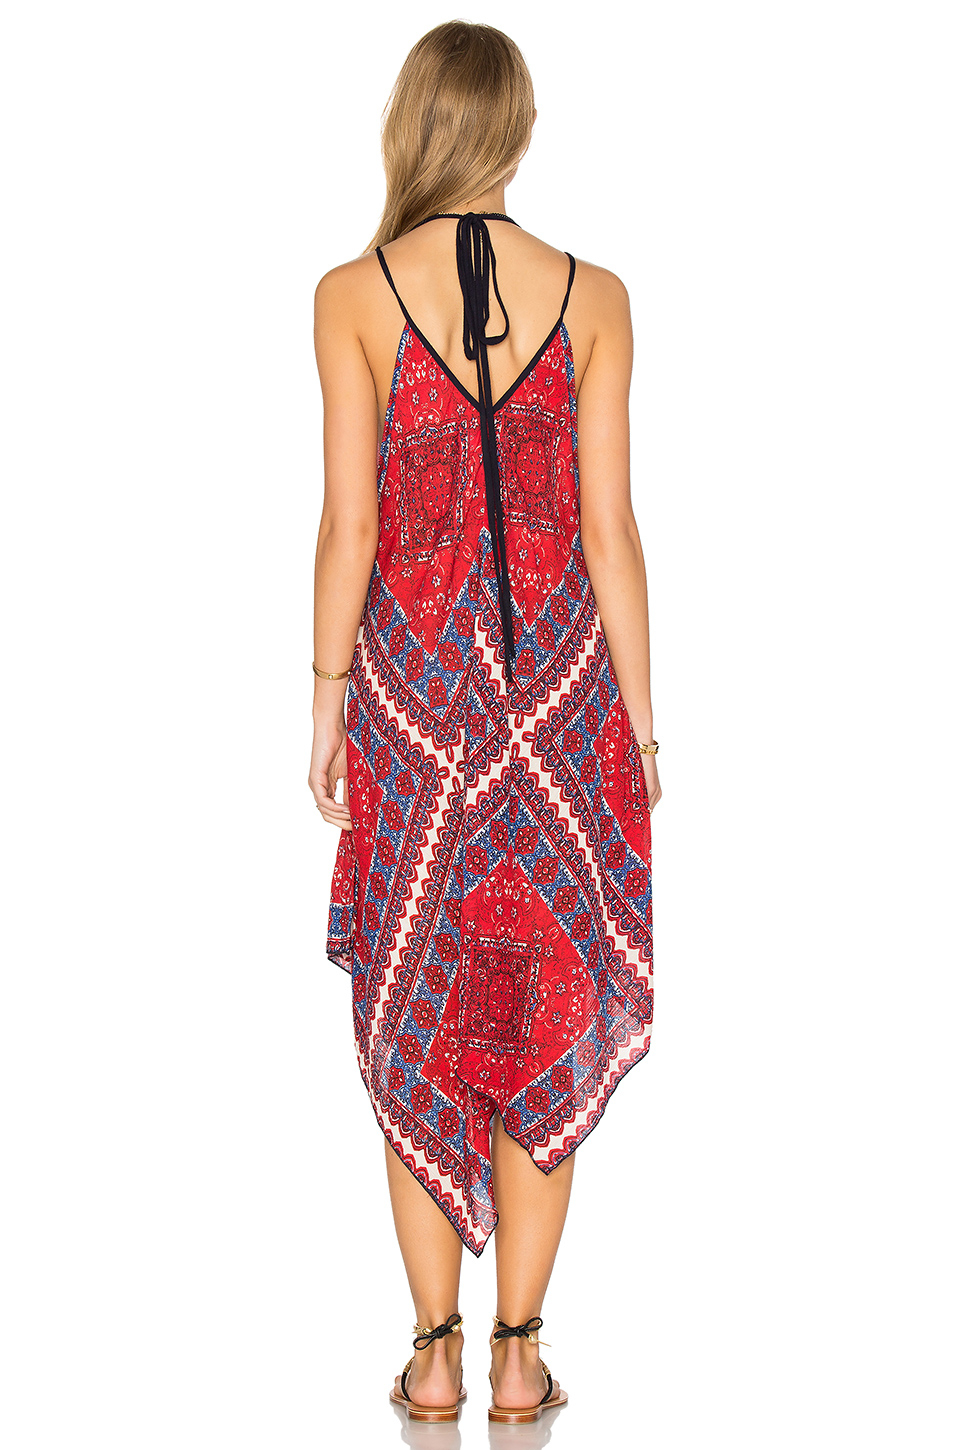 Lyst - Band Of Gypsies Sleeveless V Neck Dress in Red